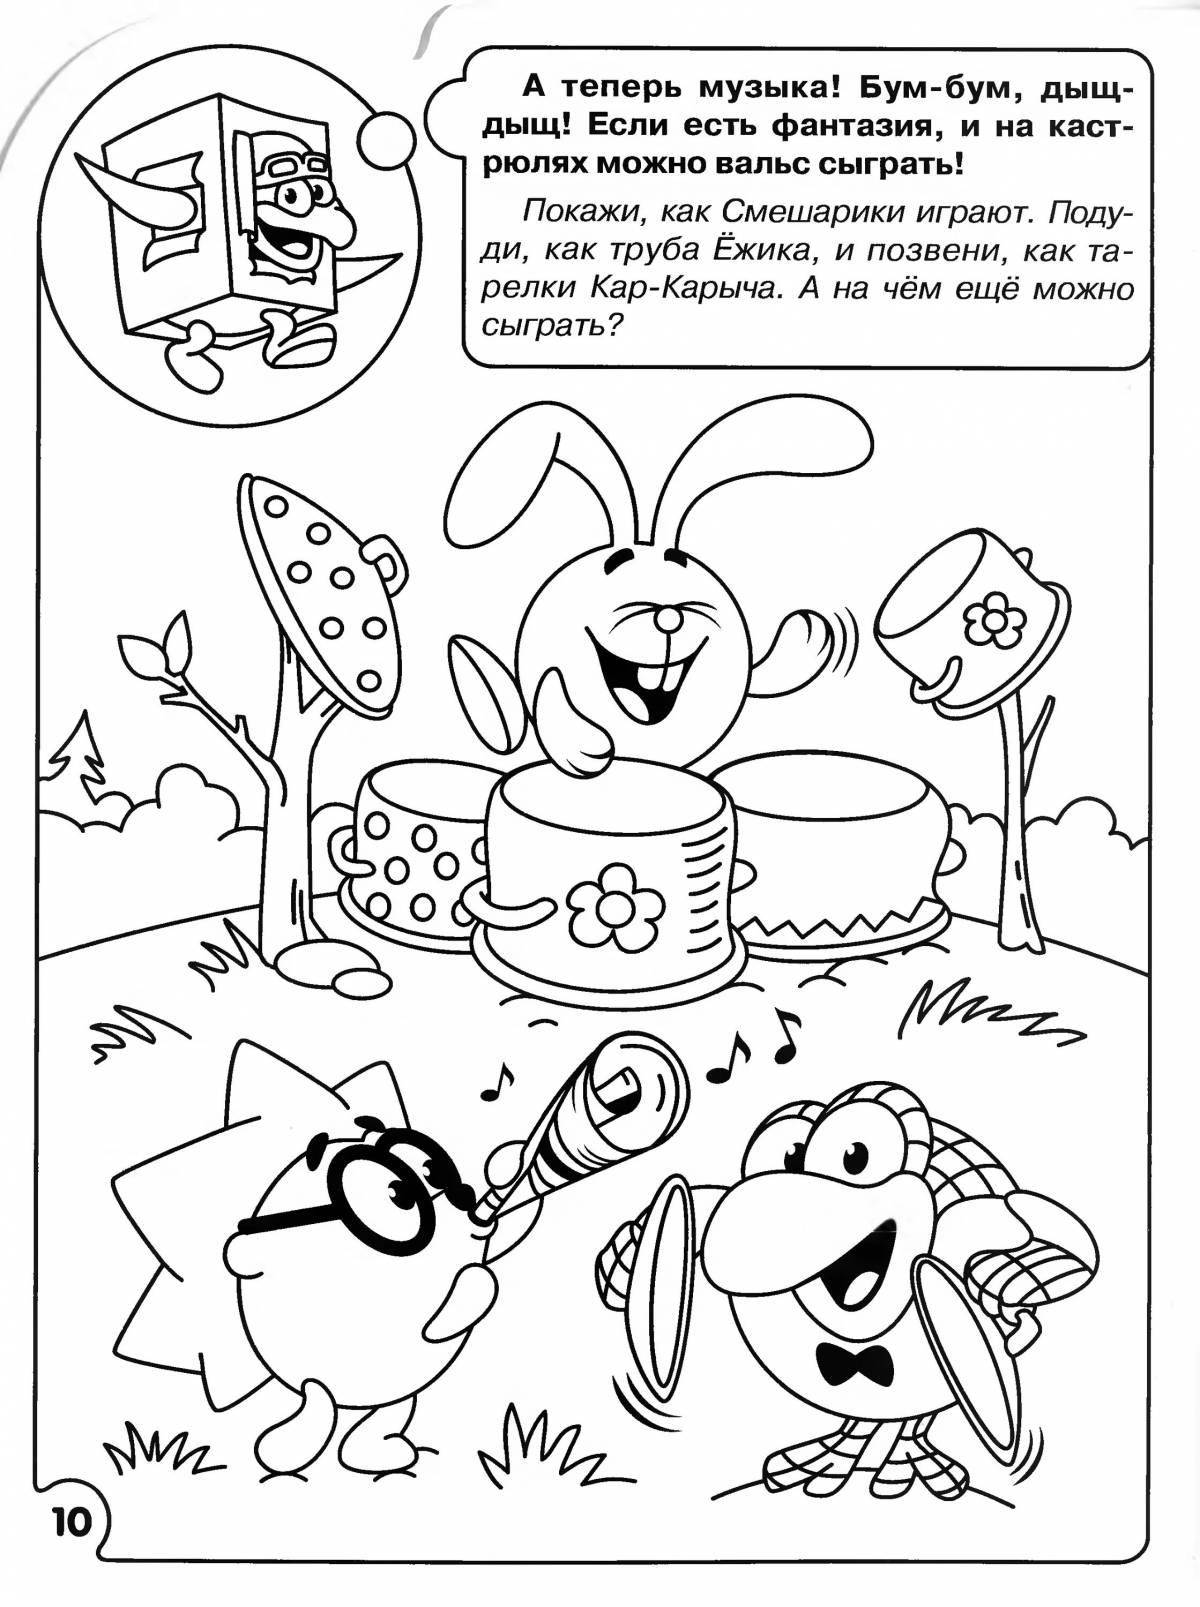 Funny comics coloring for girls